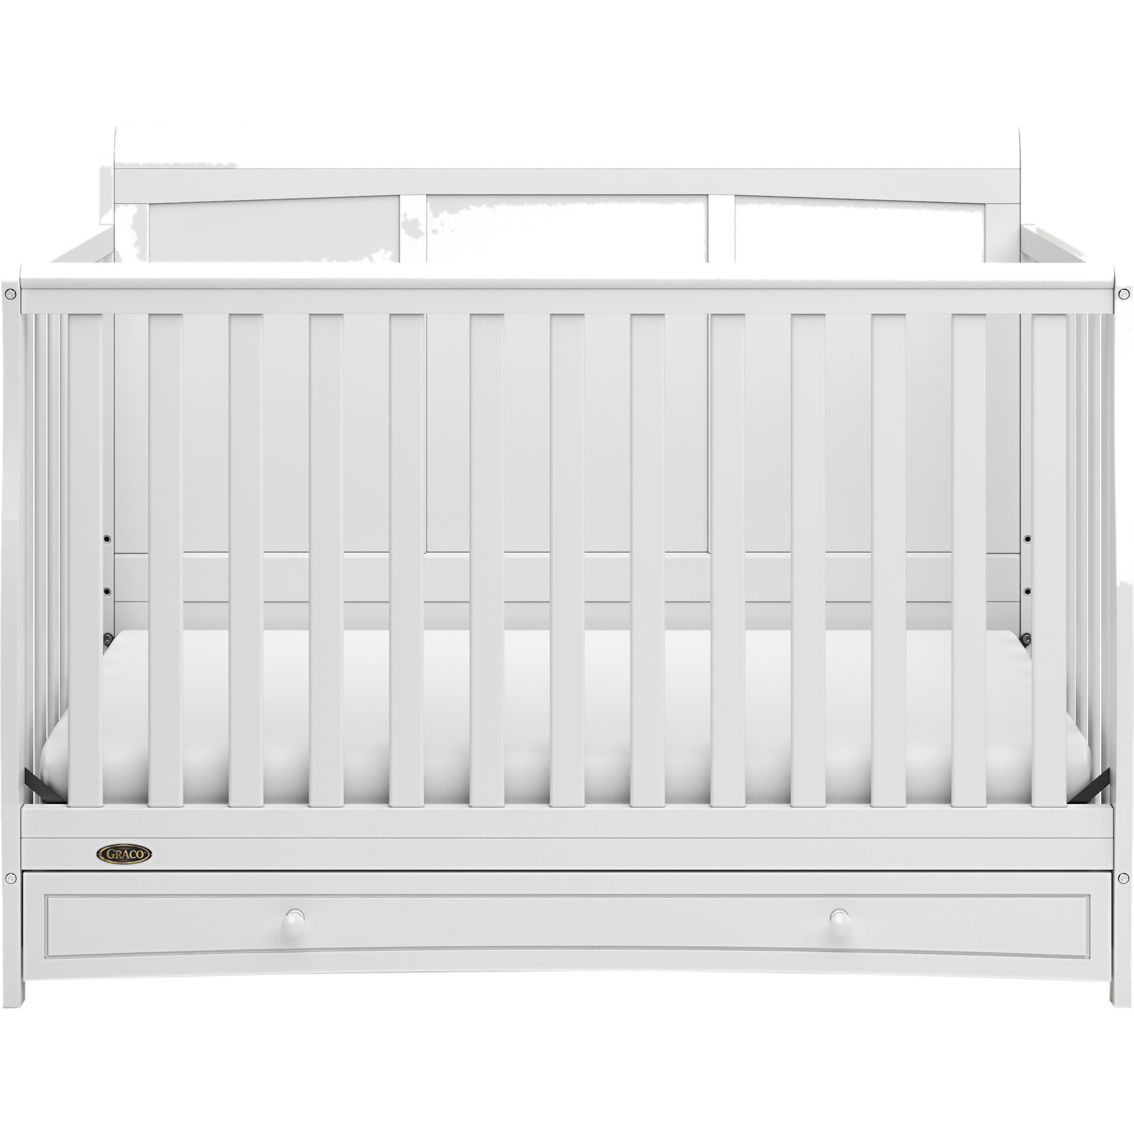 Graco Asheville 4-in-1 Convertible Crib with Drawer - Image 2 of 8